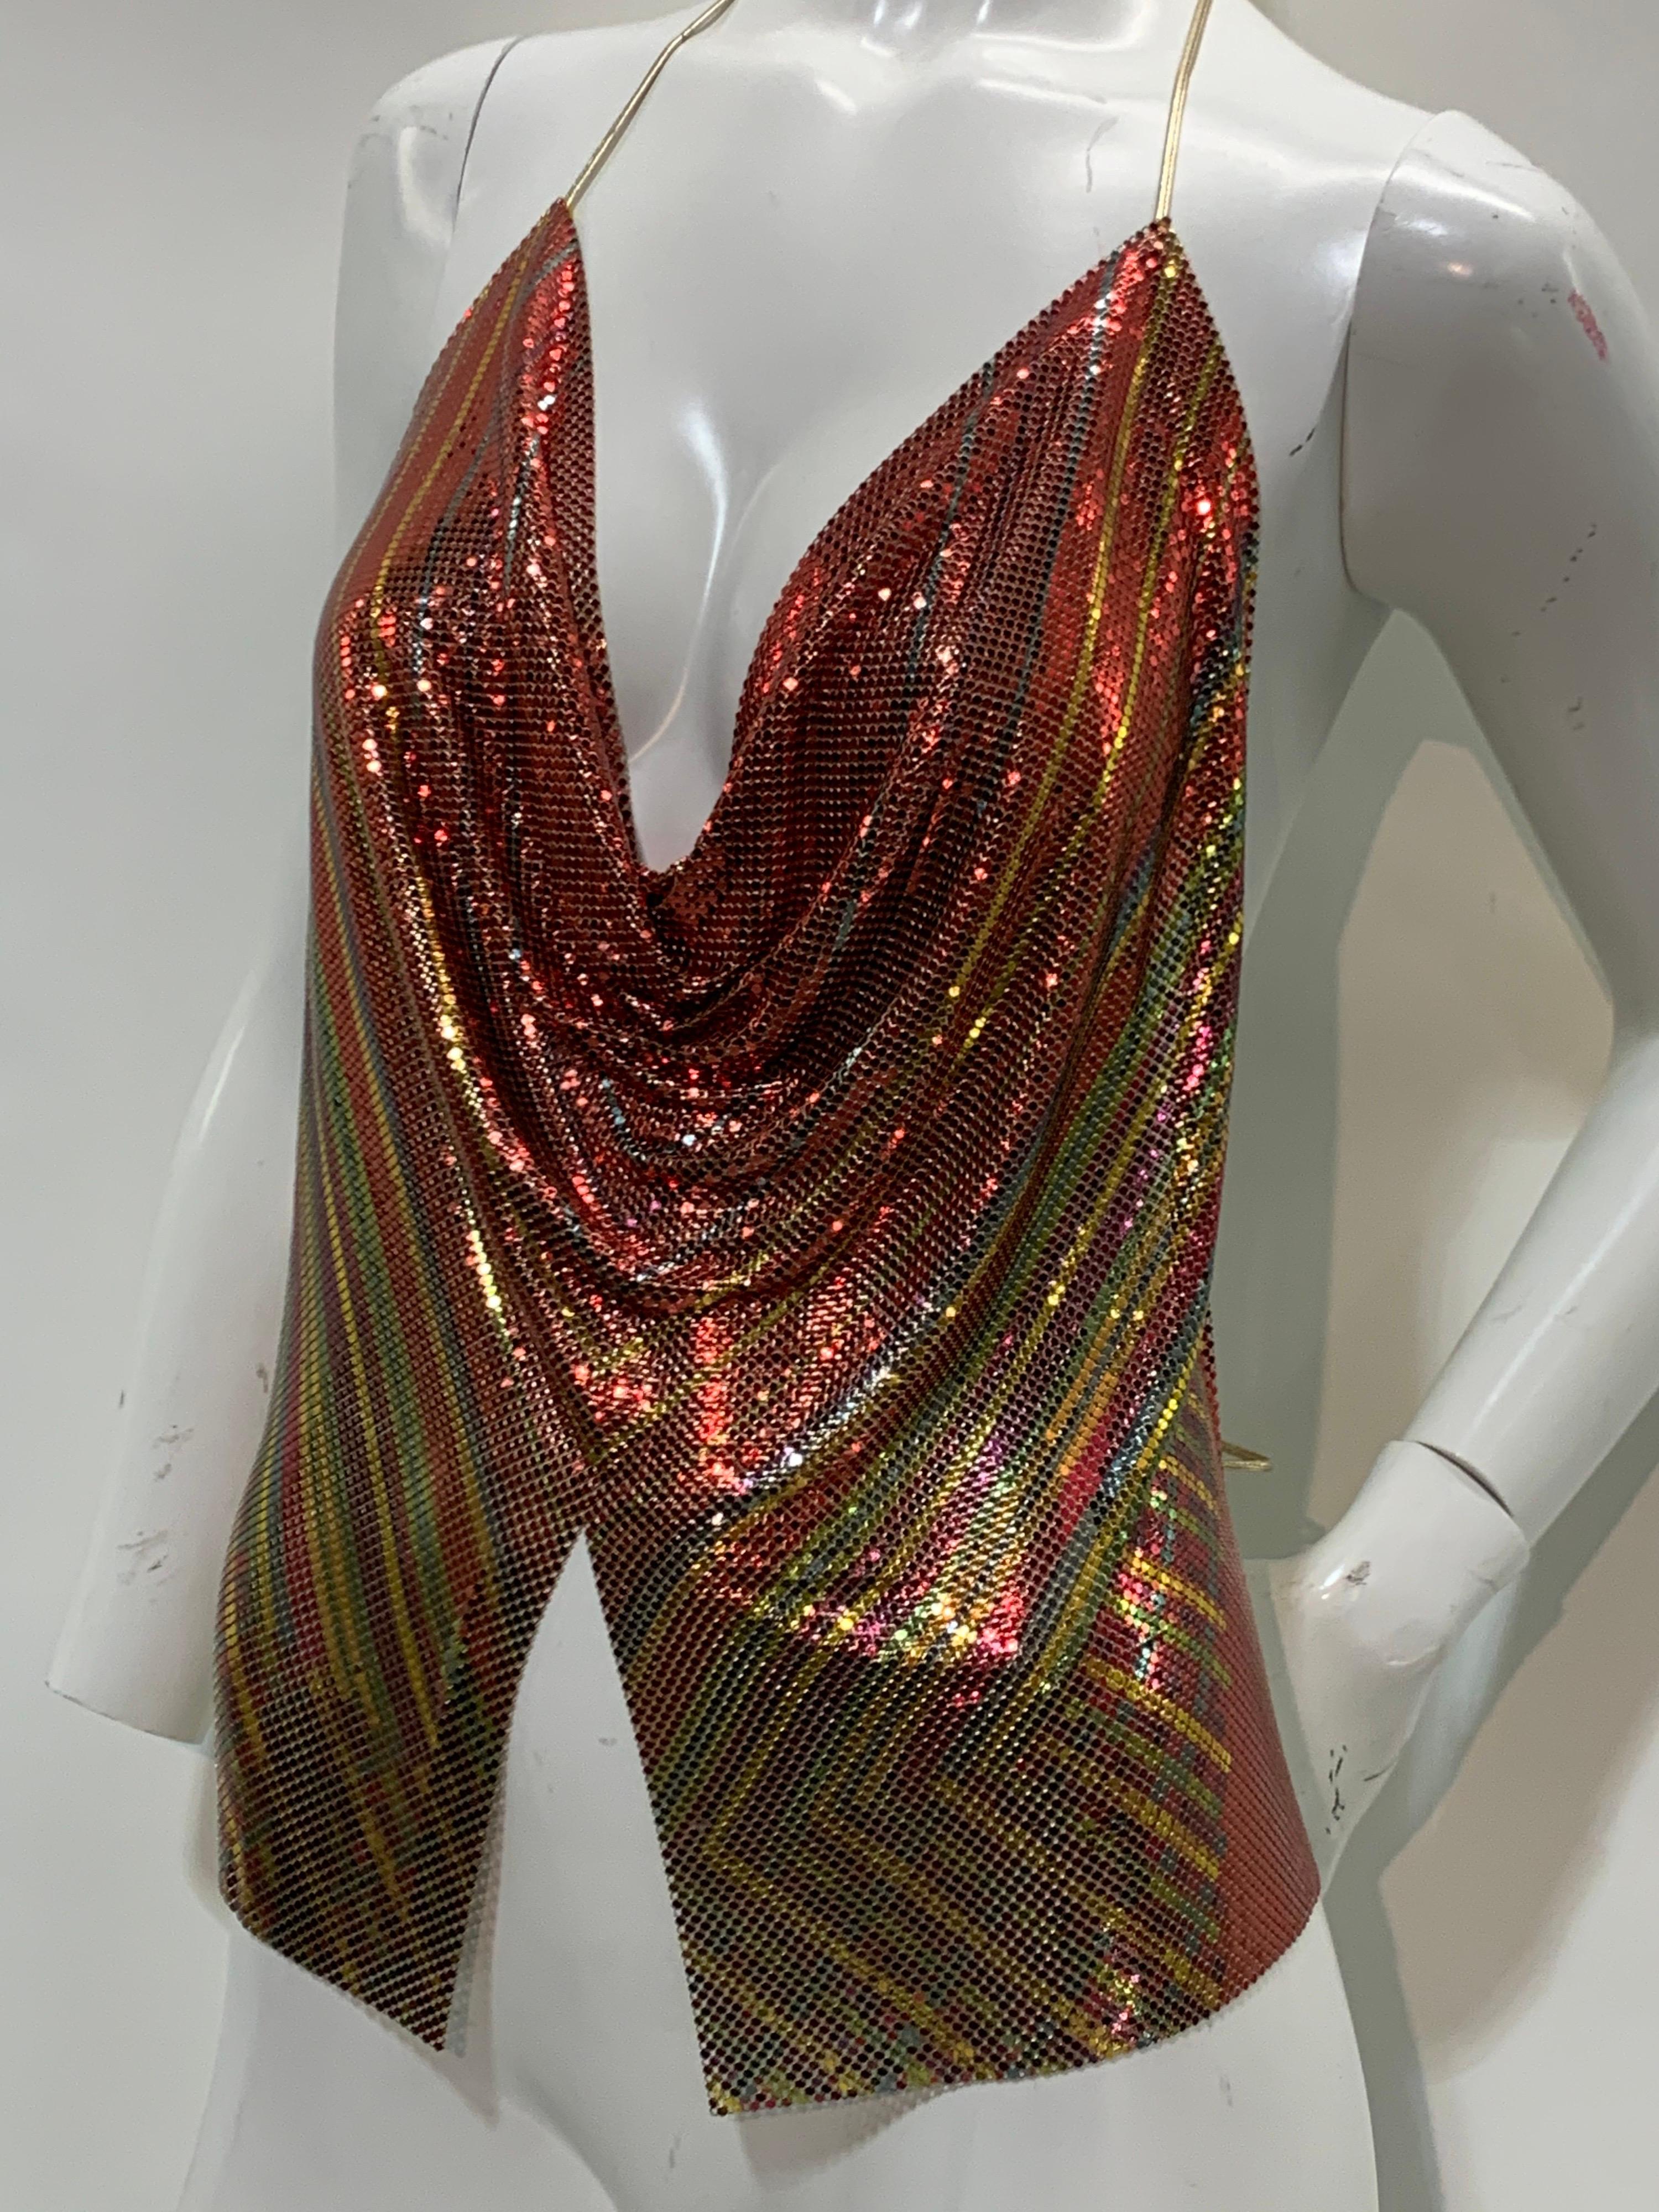 An unusual 1970s Whiting & Davis slinky metal mesh disco halter top in stripes of copper, gold and green. Gold leather ties at neck and back and felt edged at underarms for maximum comfort and freedom. Adjustable medium size. 